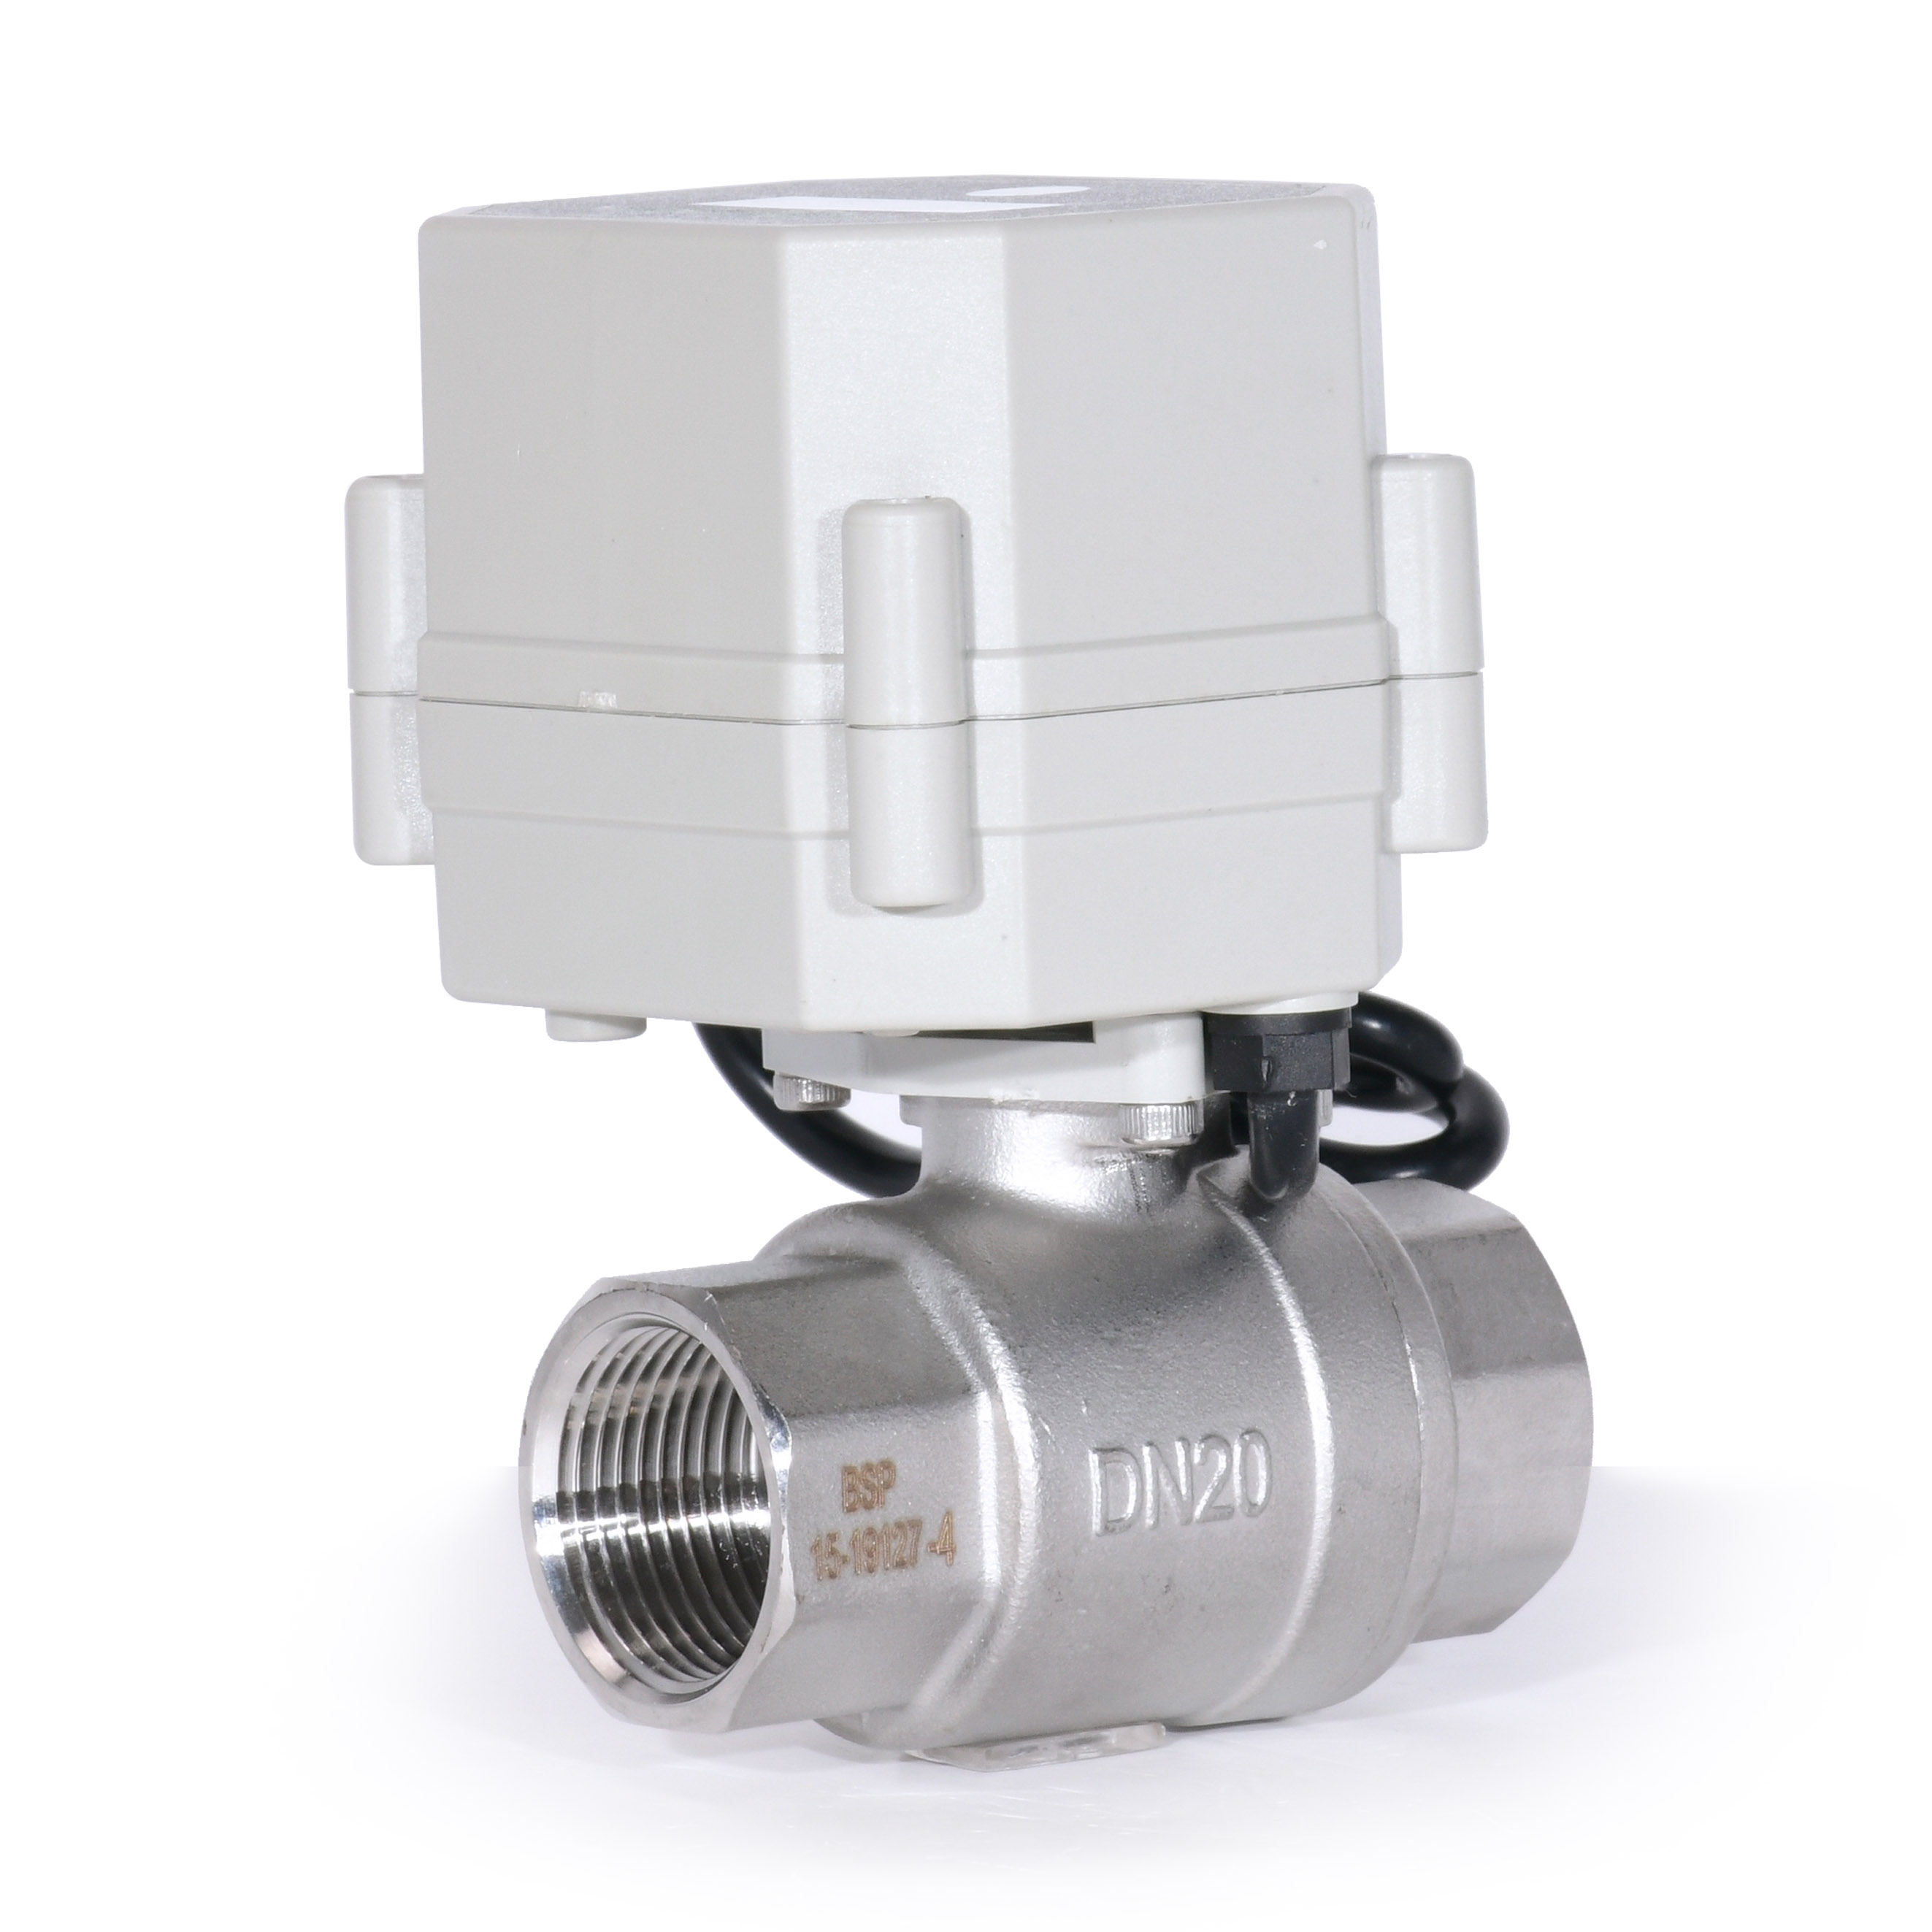 Three advantages of Tonhe mini stainless steel electric valve 